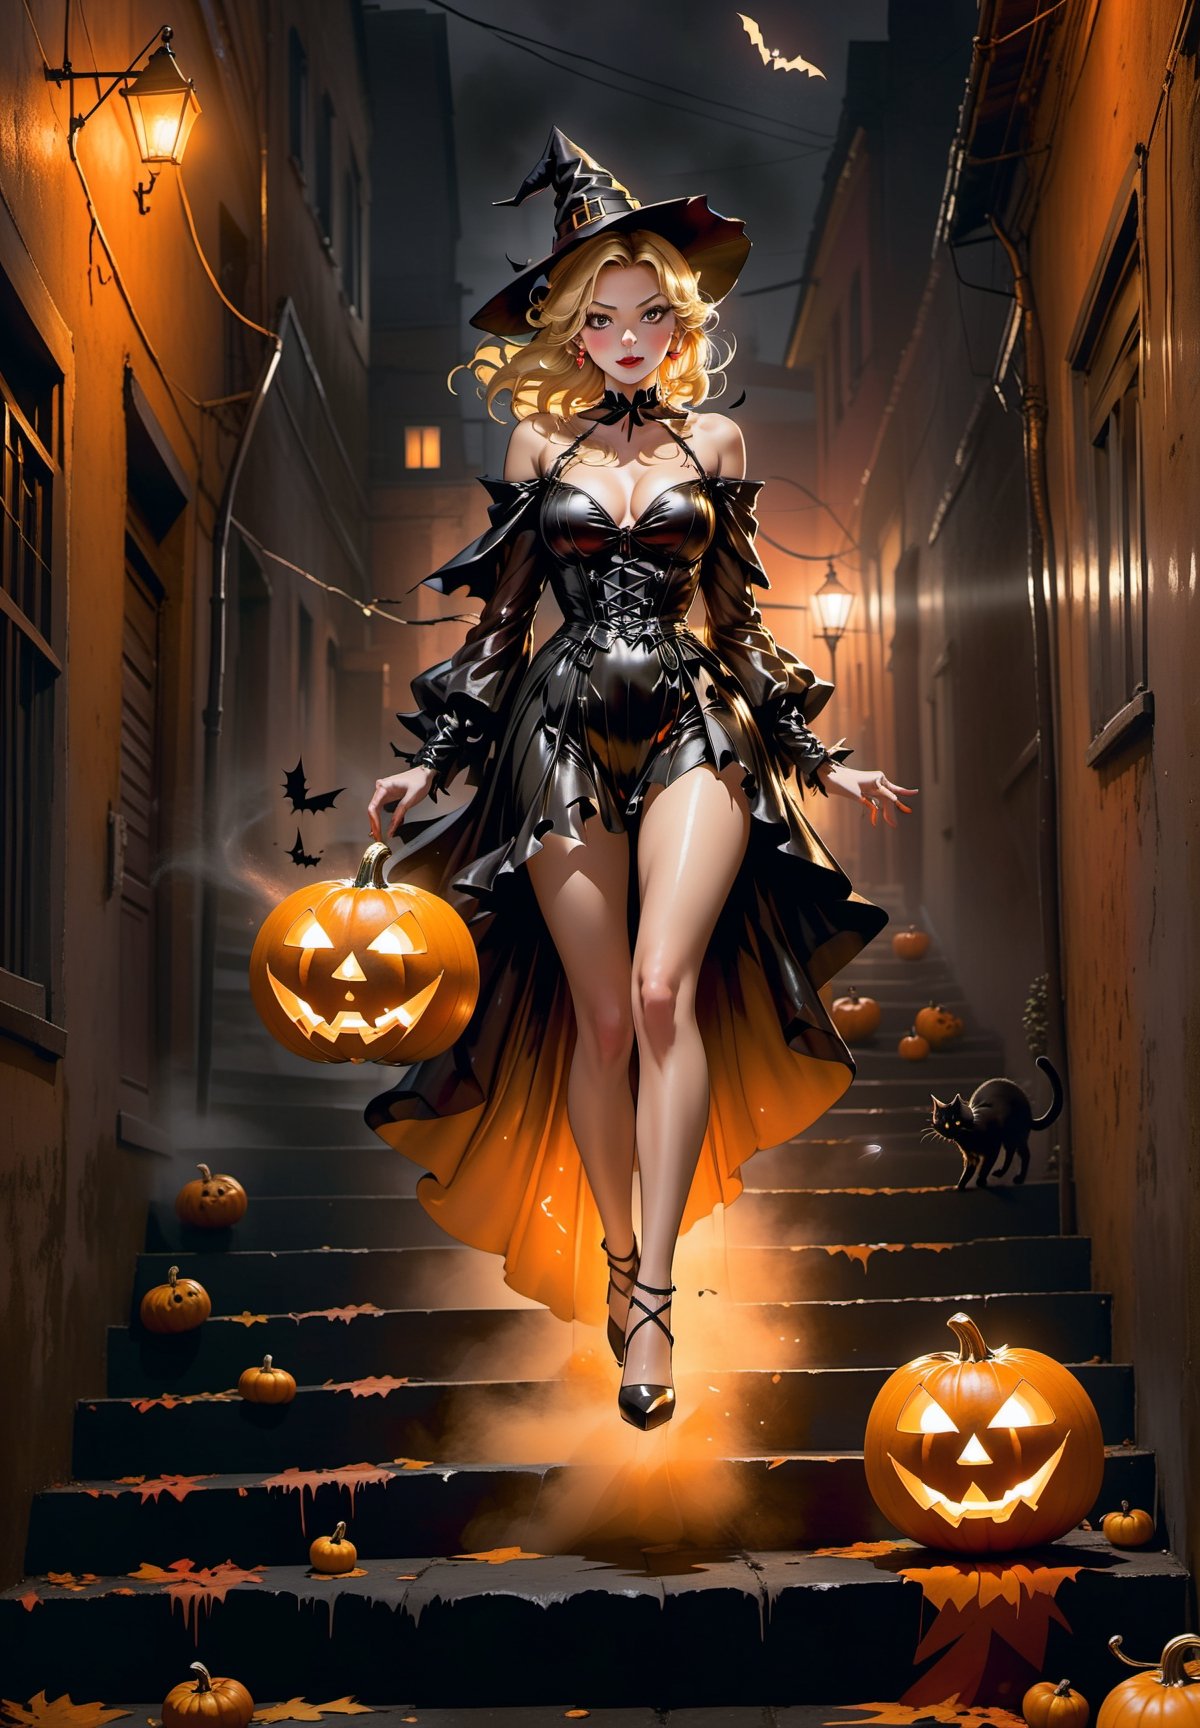 full body closeup, Photorealistic art style, a beautiful blonde woman in witch costume and high heels, throwing a pumpkin at the viewers, motion, artistic, artist, simple volumtric light backgroung walking down a stair in a dark alley, black cat crossing in the foreground, ColorART, windy and misty,